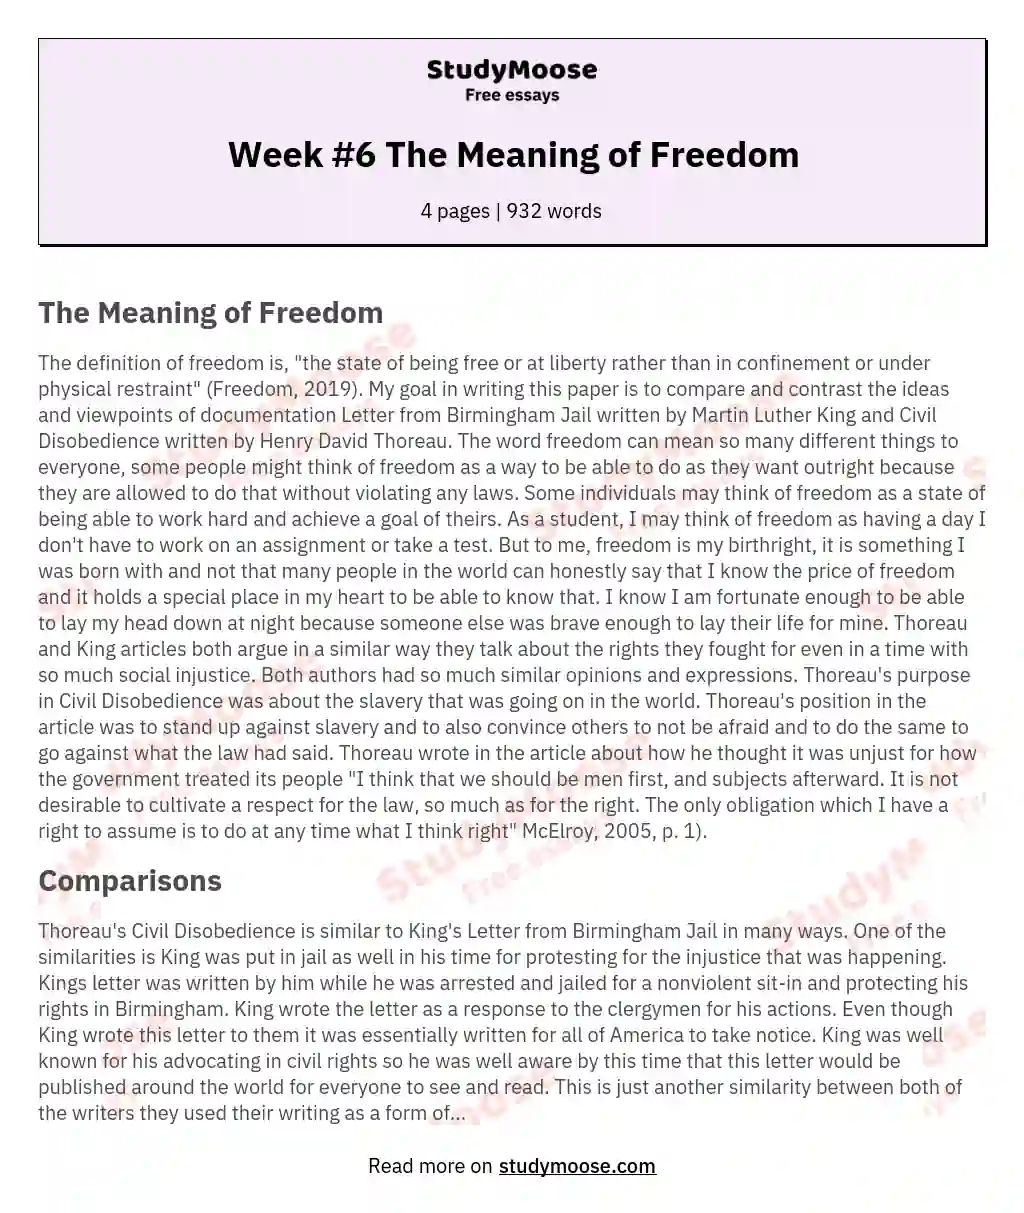 Week #6 The Meaning of Freedom essay